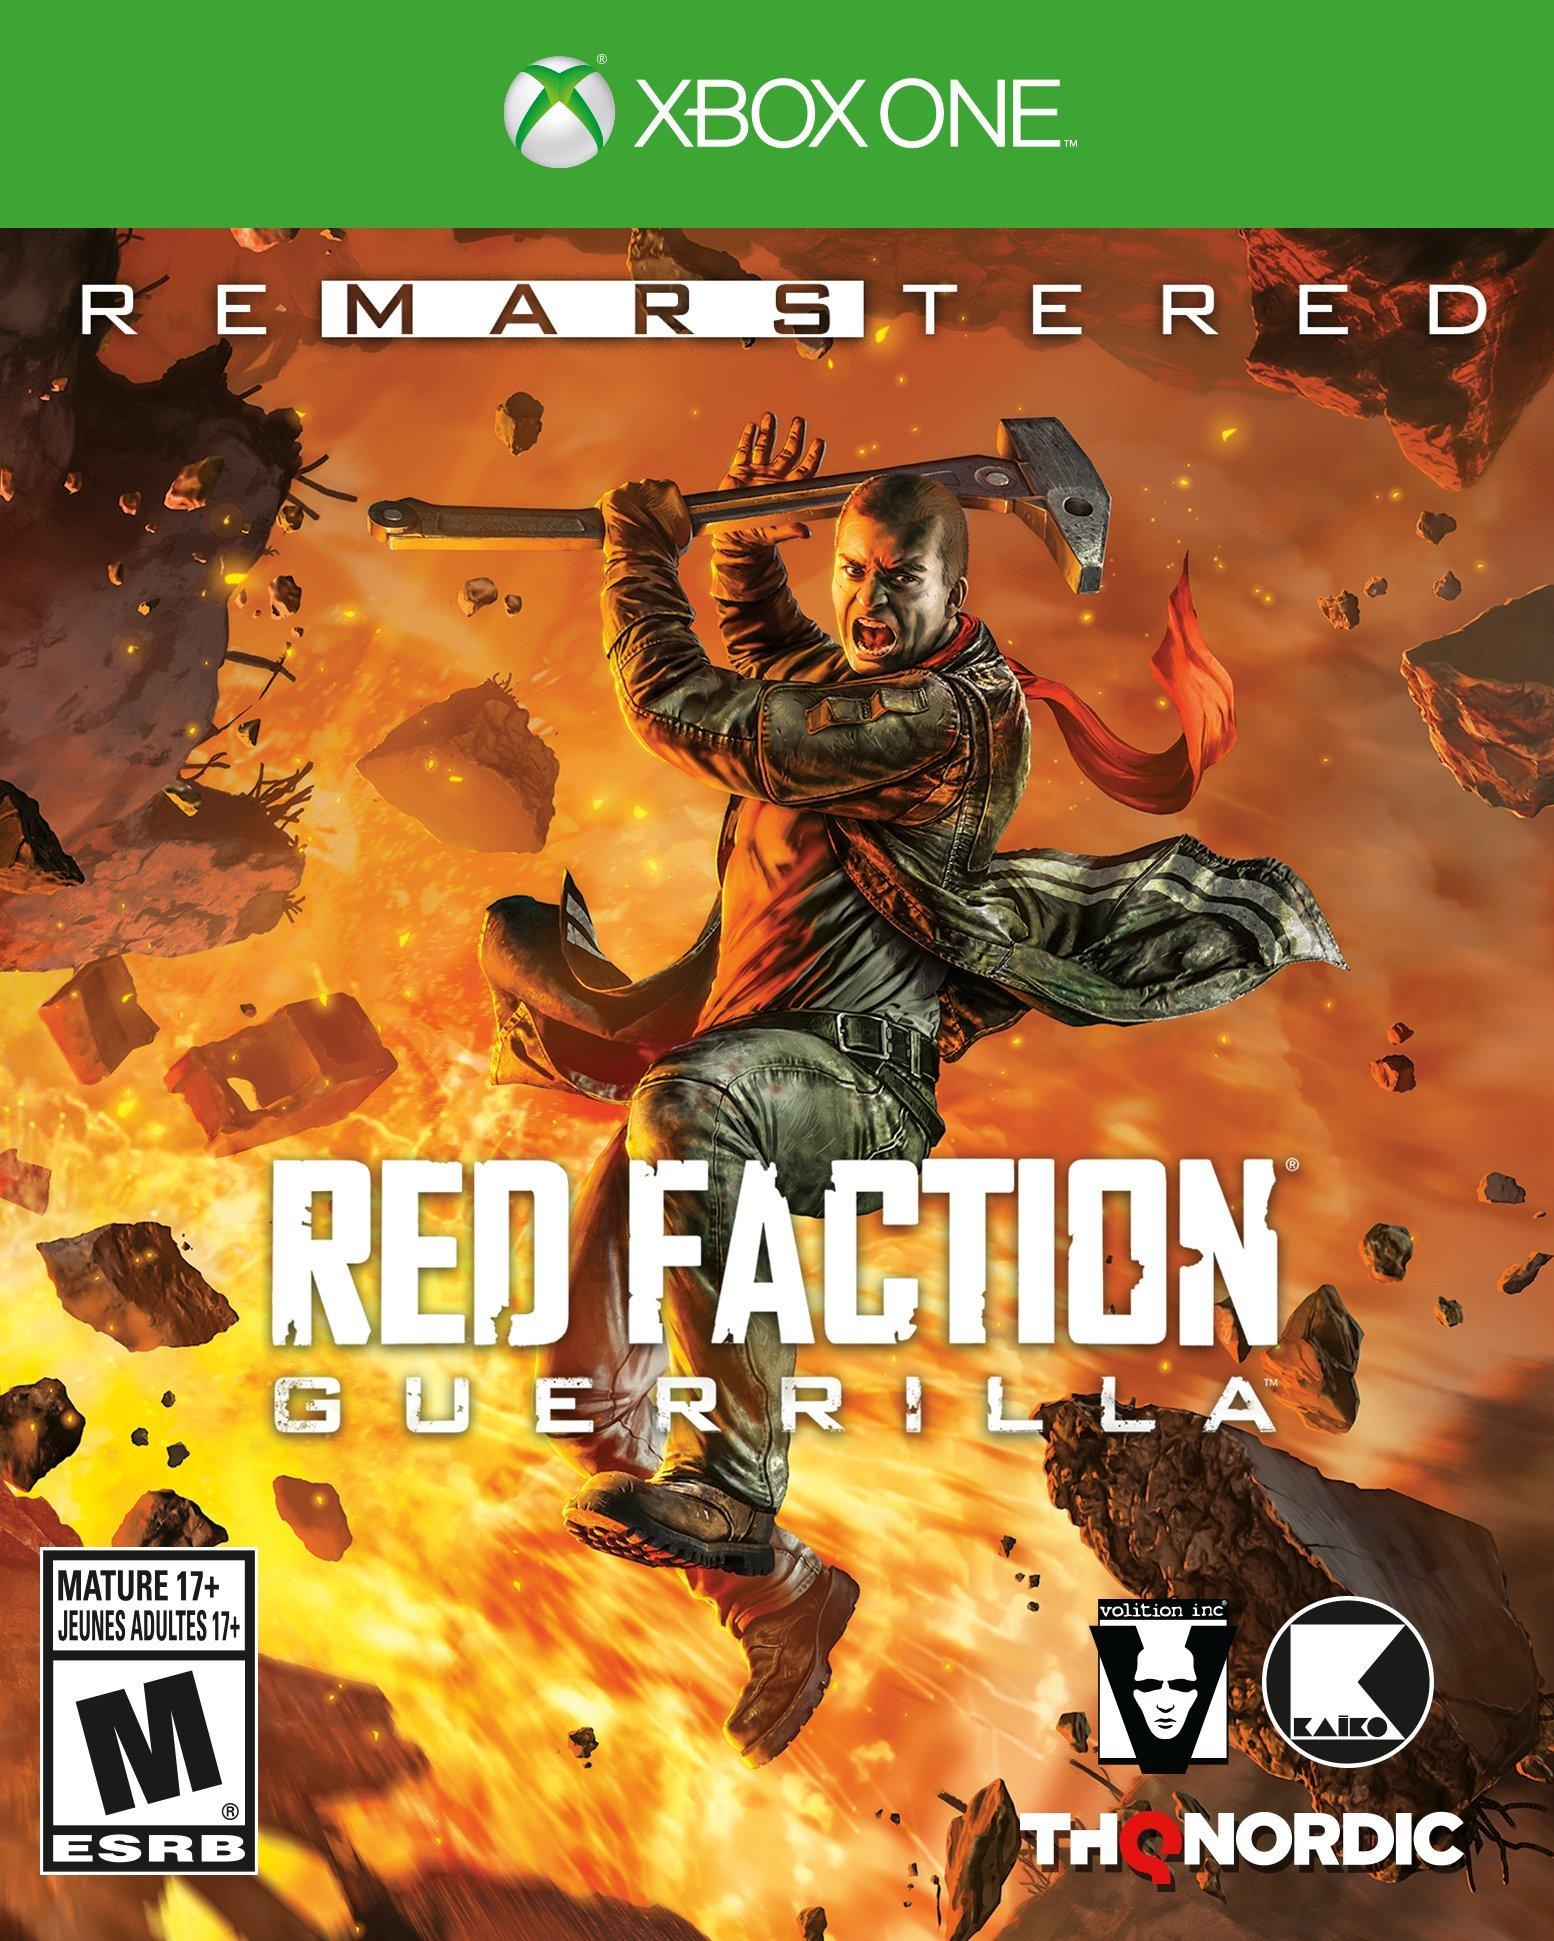 red faction 2 xbox marketplace